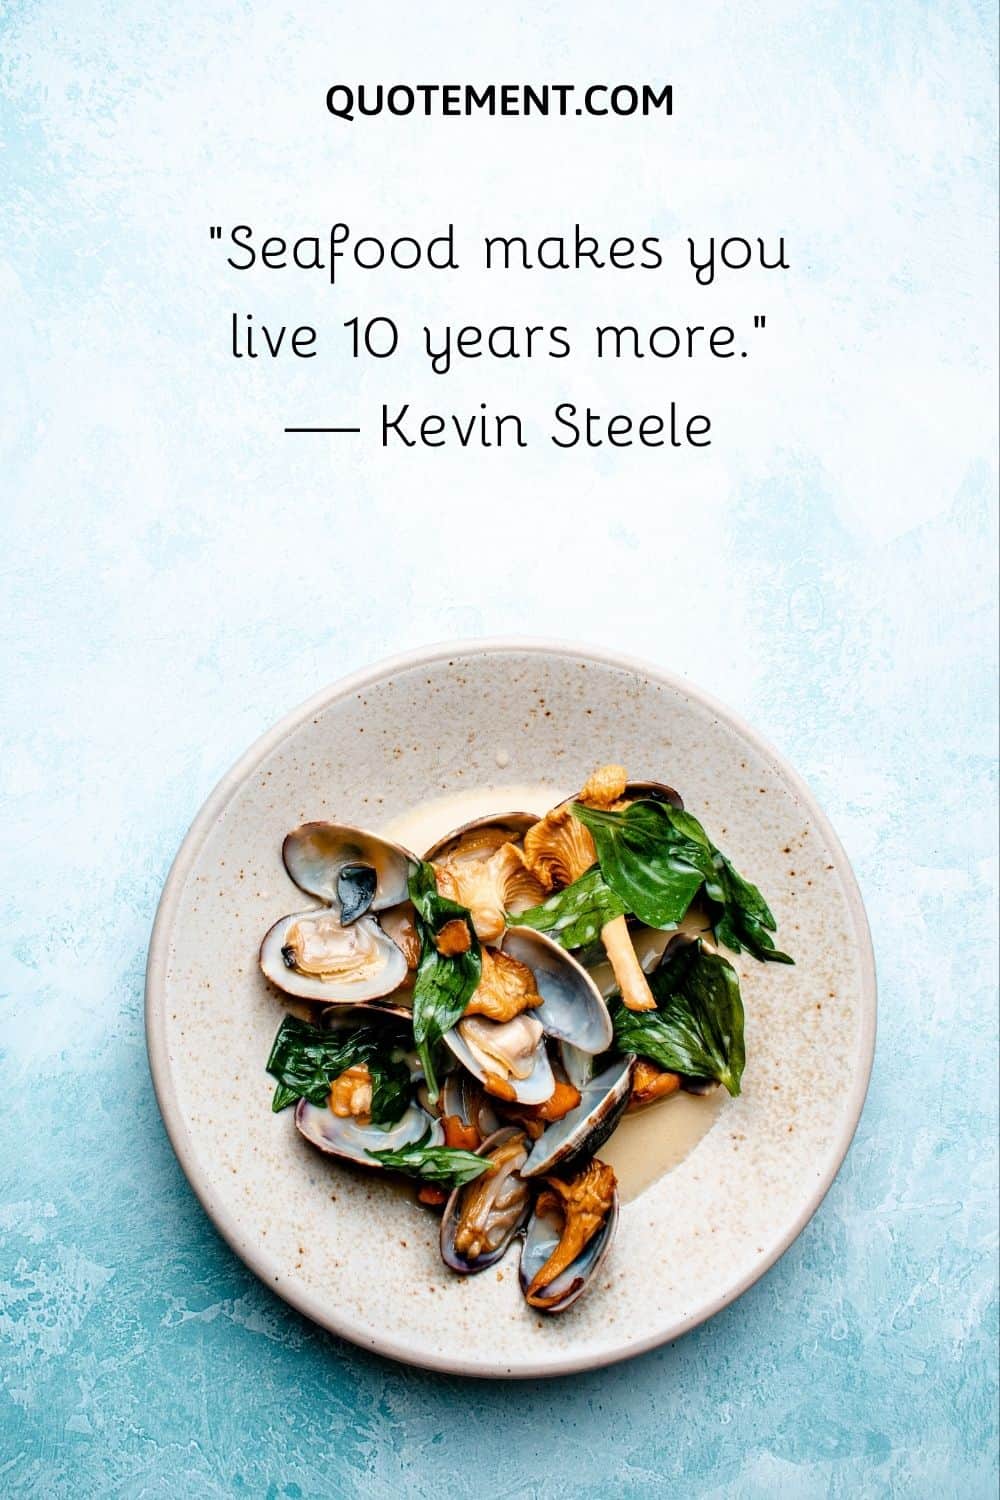 Seafood makes you live 10 years more.